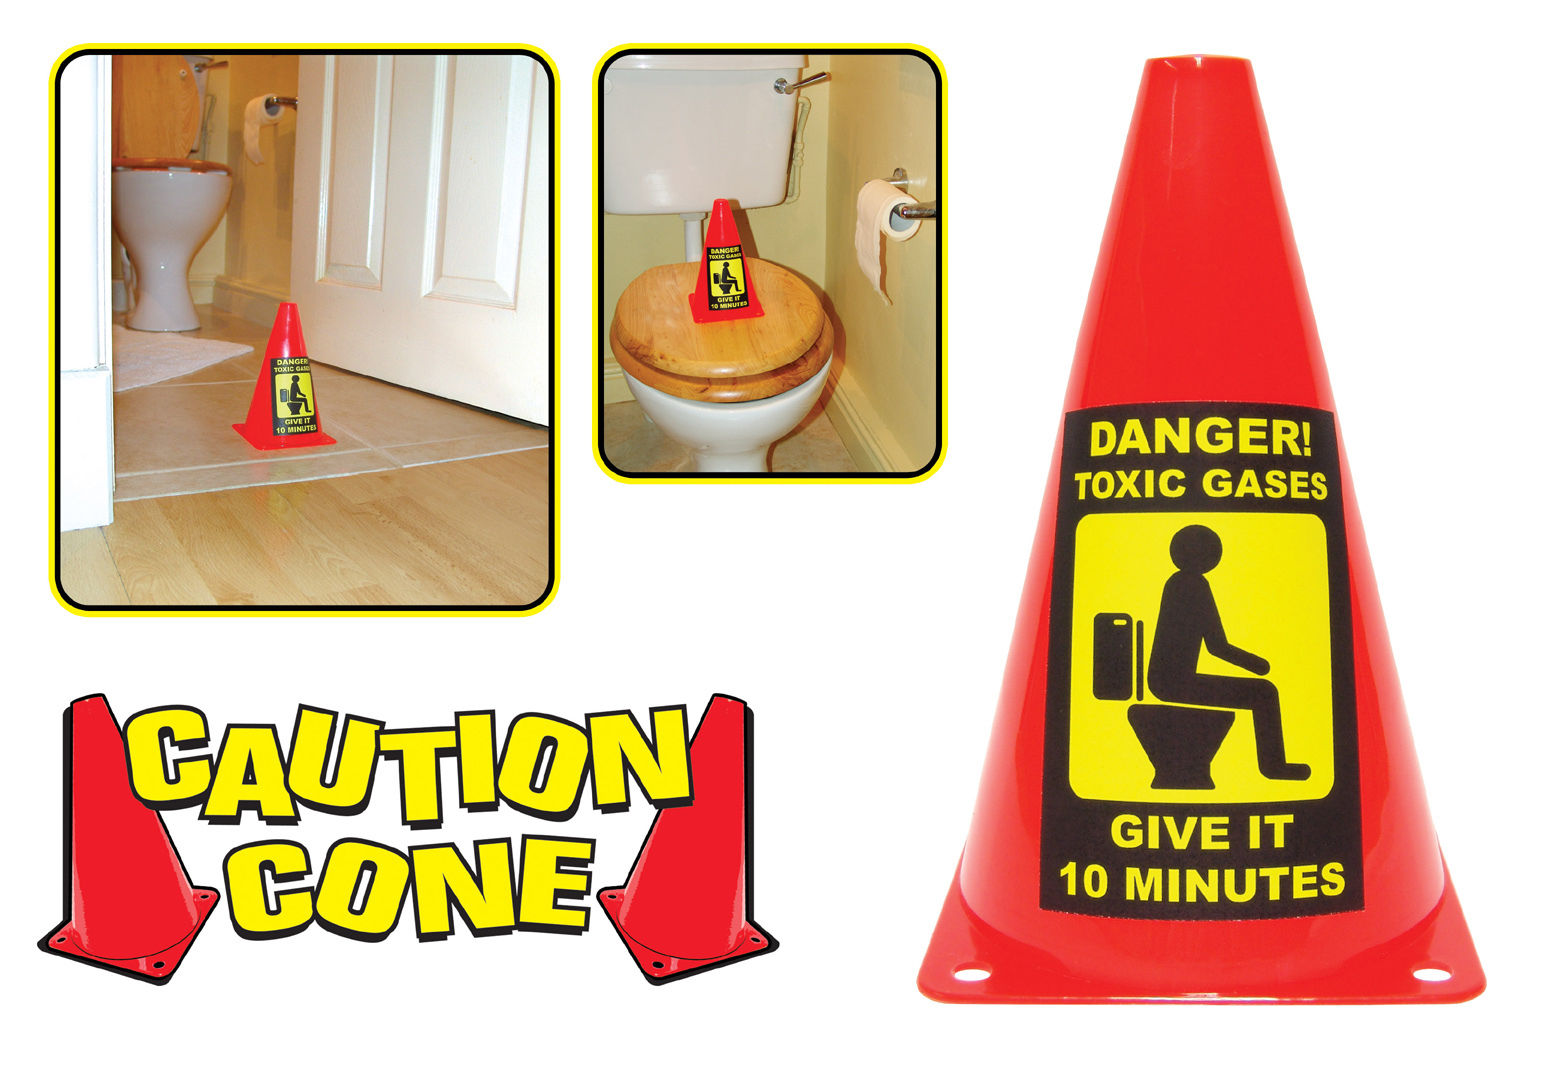 Caution Cone Toxic Gas Give It 10 Minutes